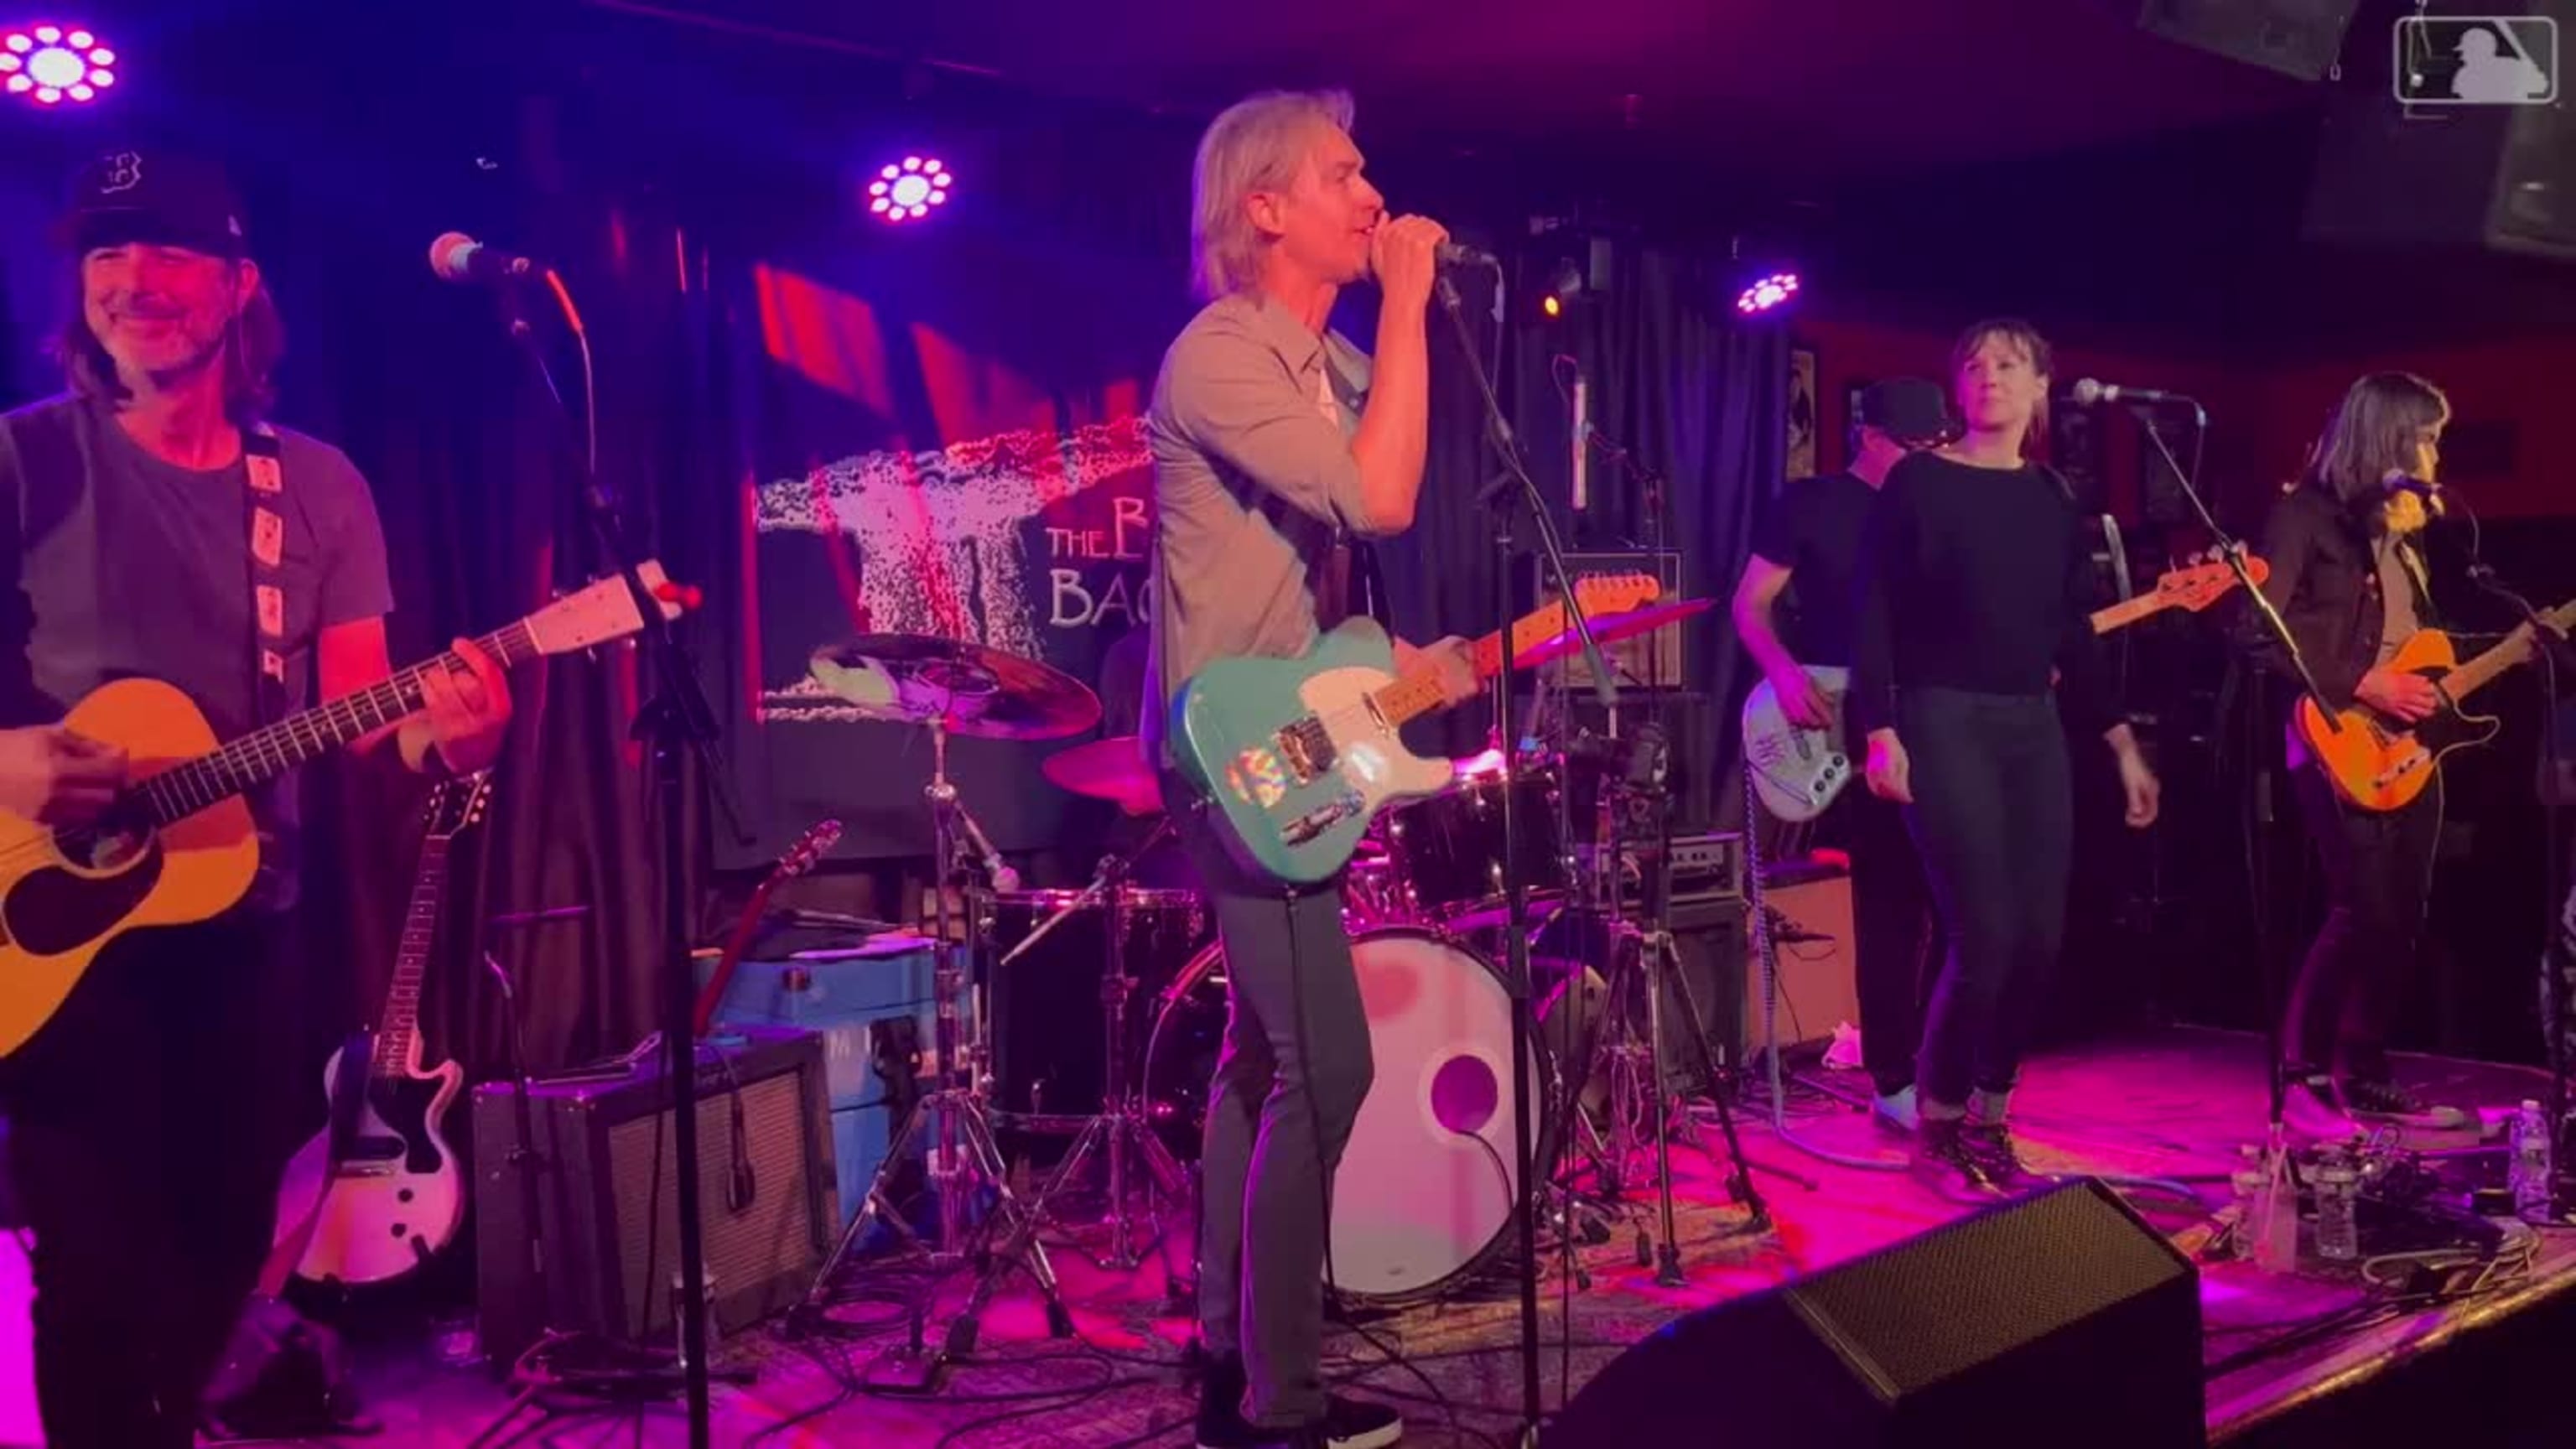 IN PICTURES: BASEBALL GREAT BRONSON ARROYO TAKES STAGE IN KEY WEST